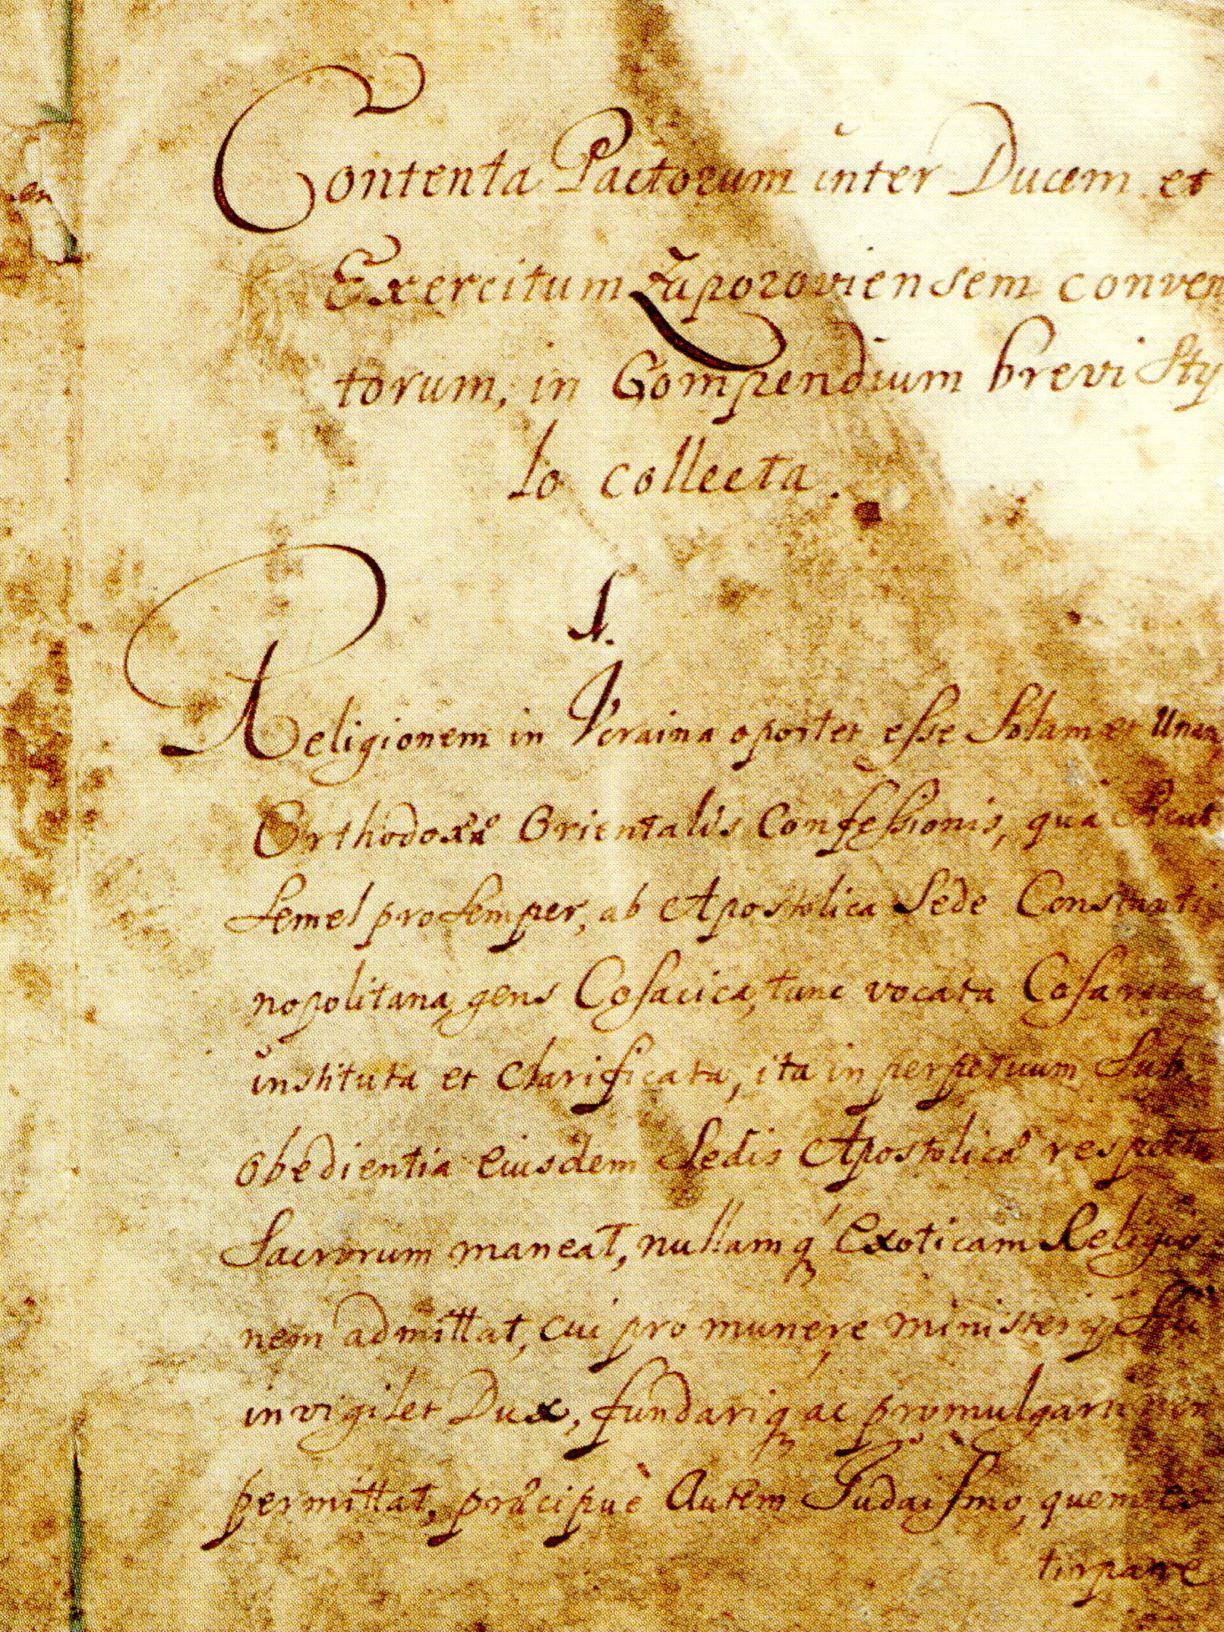 The first page of Orlik's Constitution